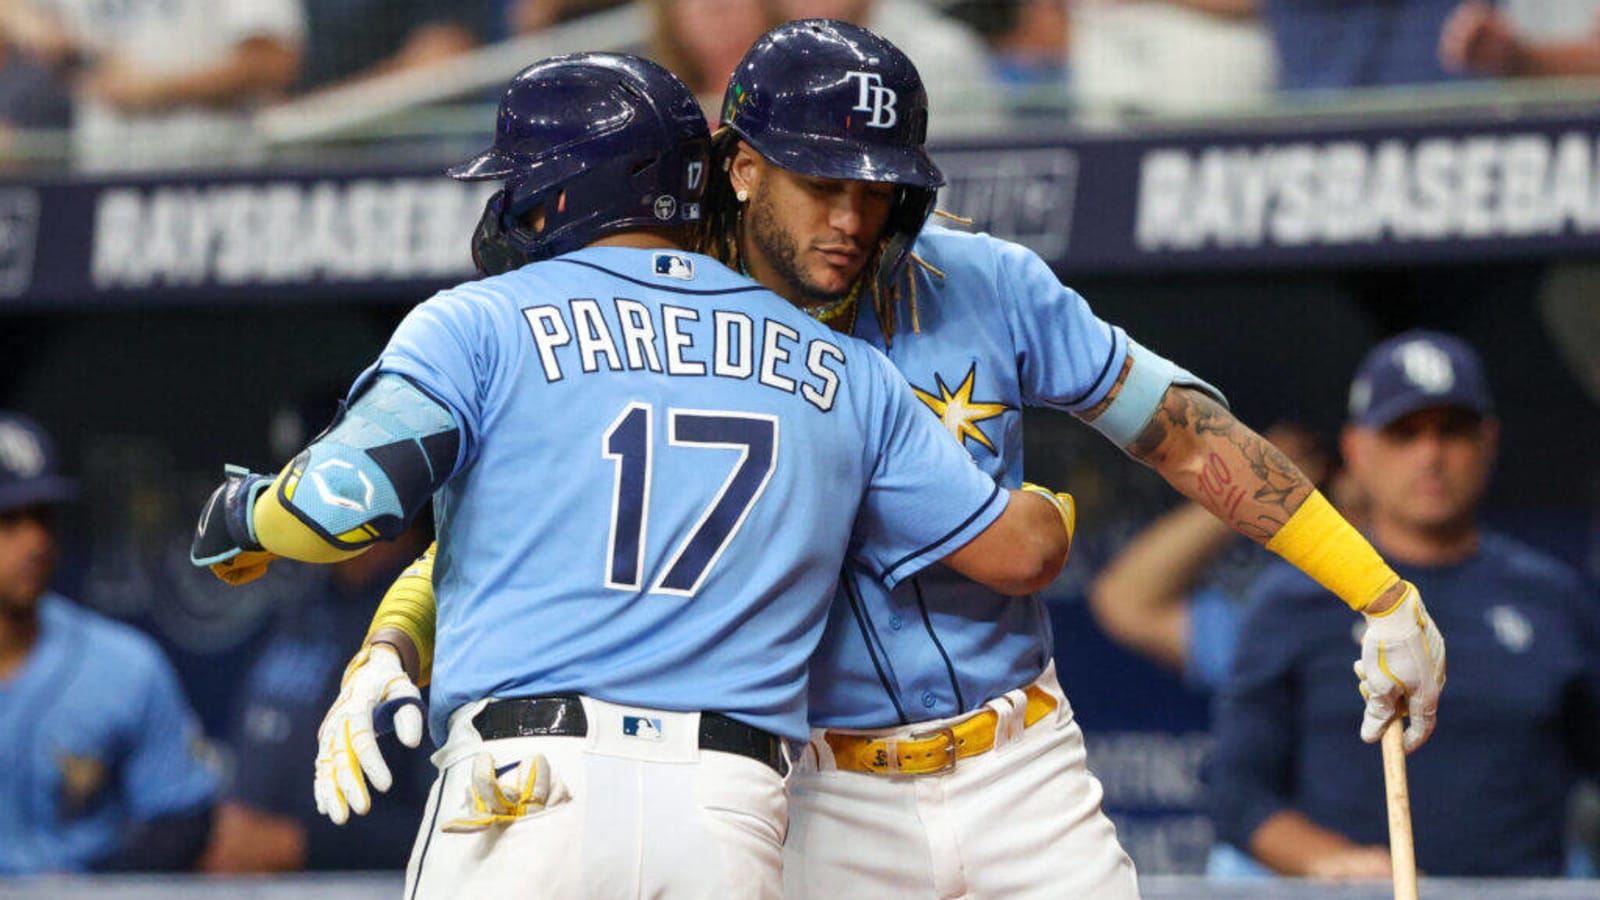 How to Watch the Rays vs. Orioles Game: Streaming & TV Info